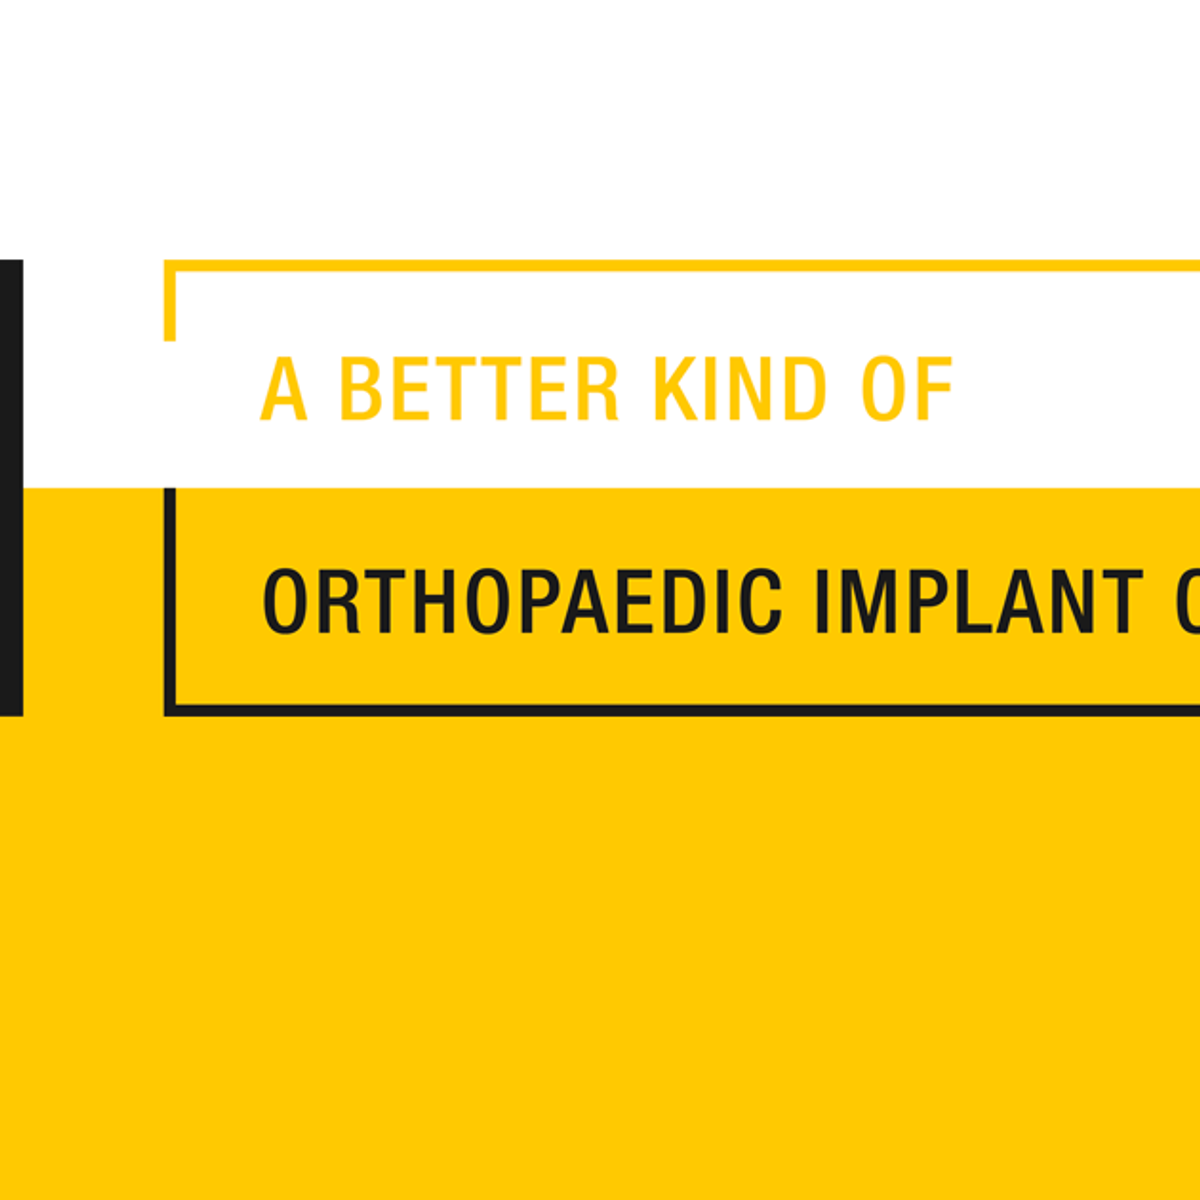 THE ORTHOPAEDIC IMPLANT COMPANY CELEBRATES TEN YEARS OF UNCONVENTIONAL ORTHOPAEDIC OPERATIONS